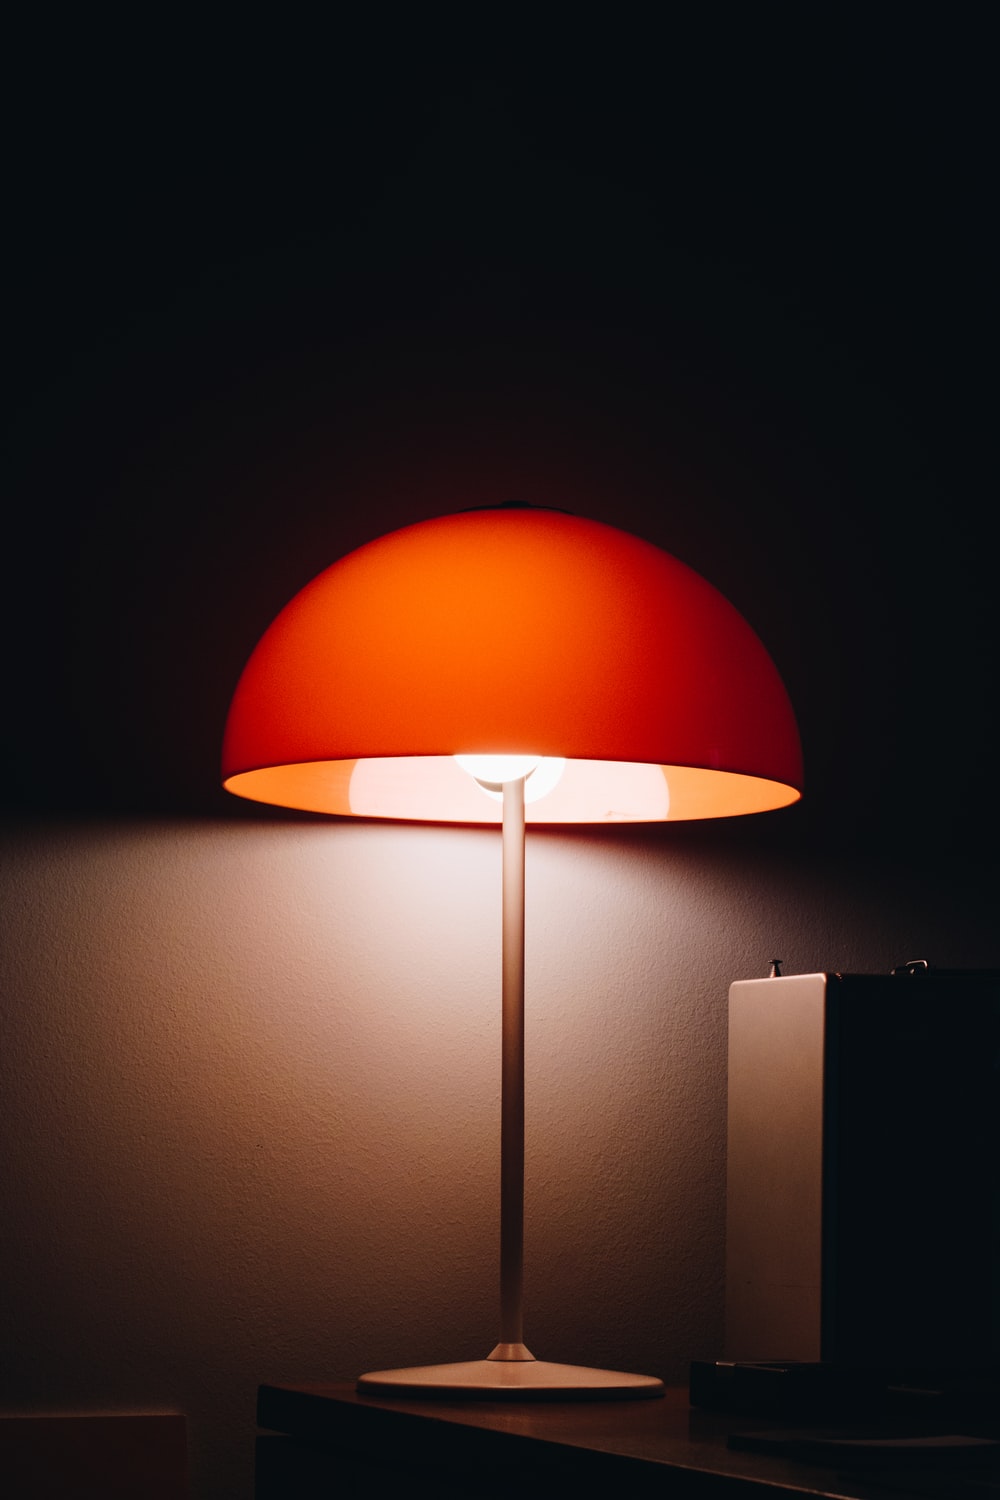 Desk Lamp Picture. Download Free Image